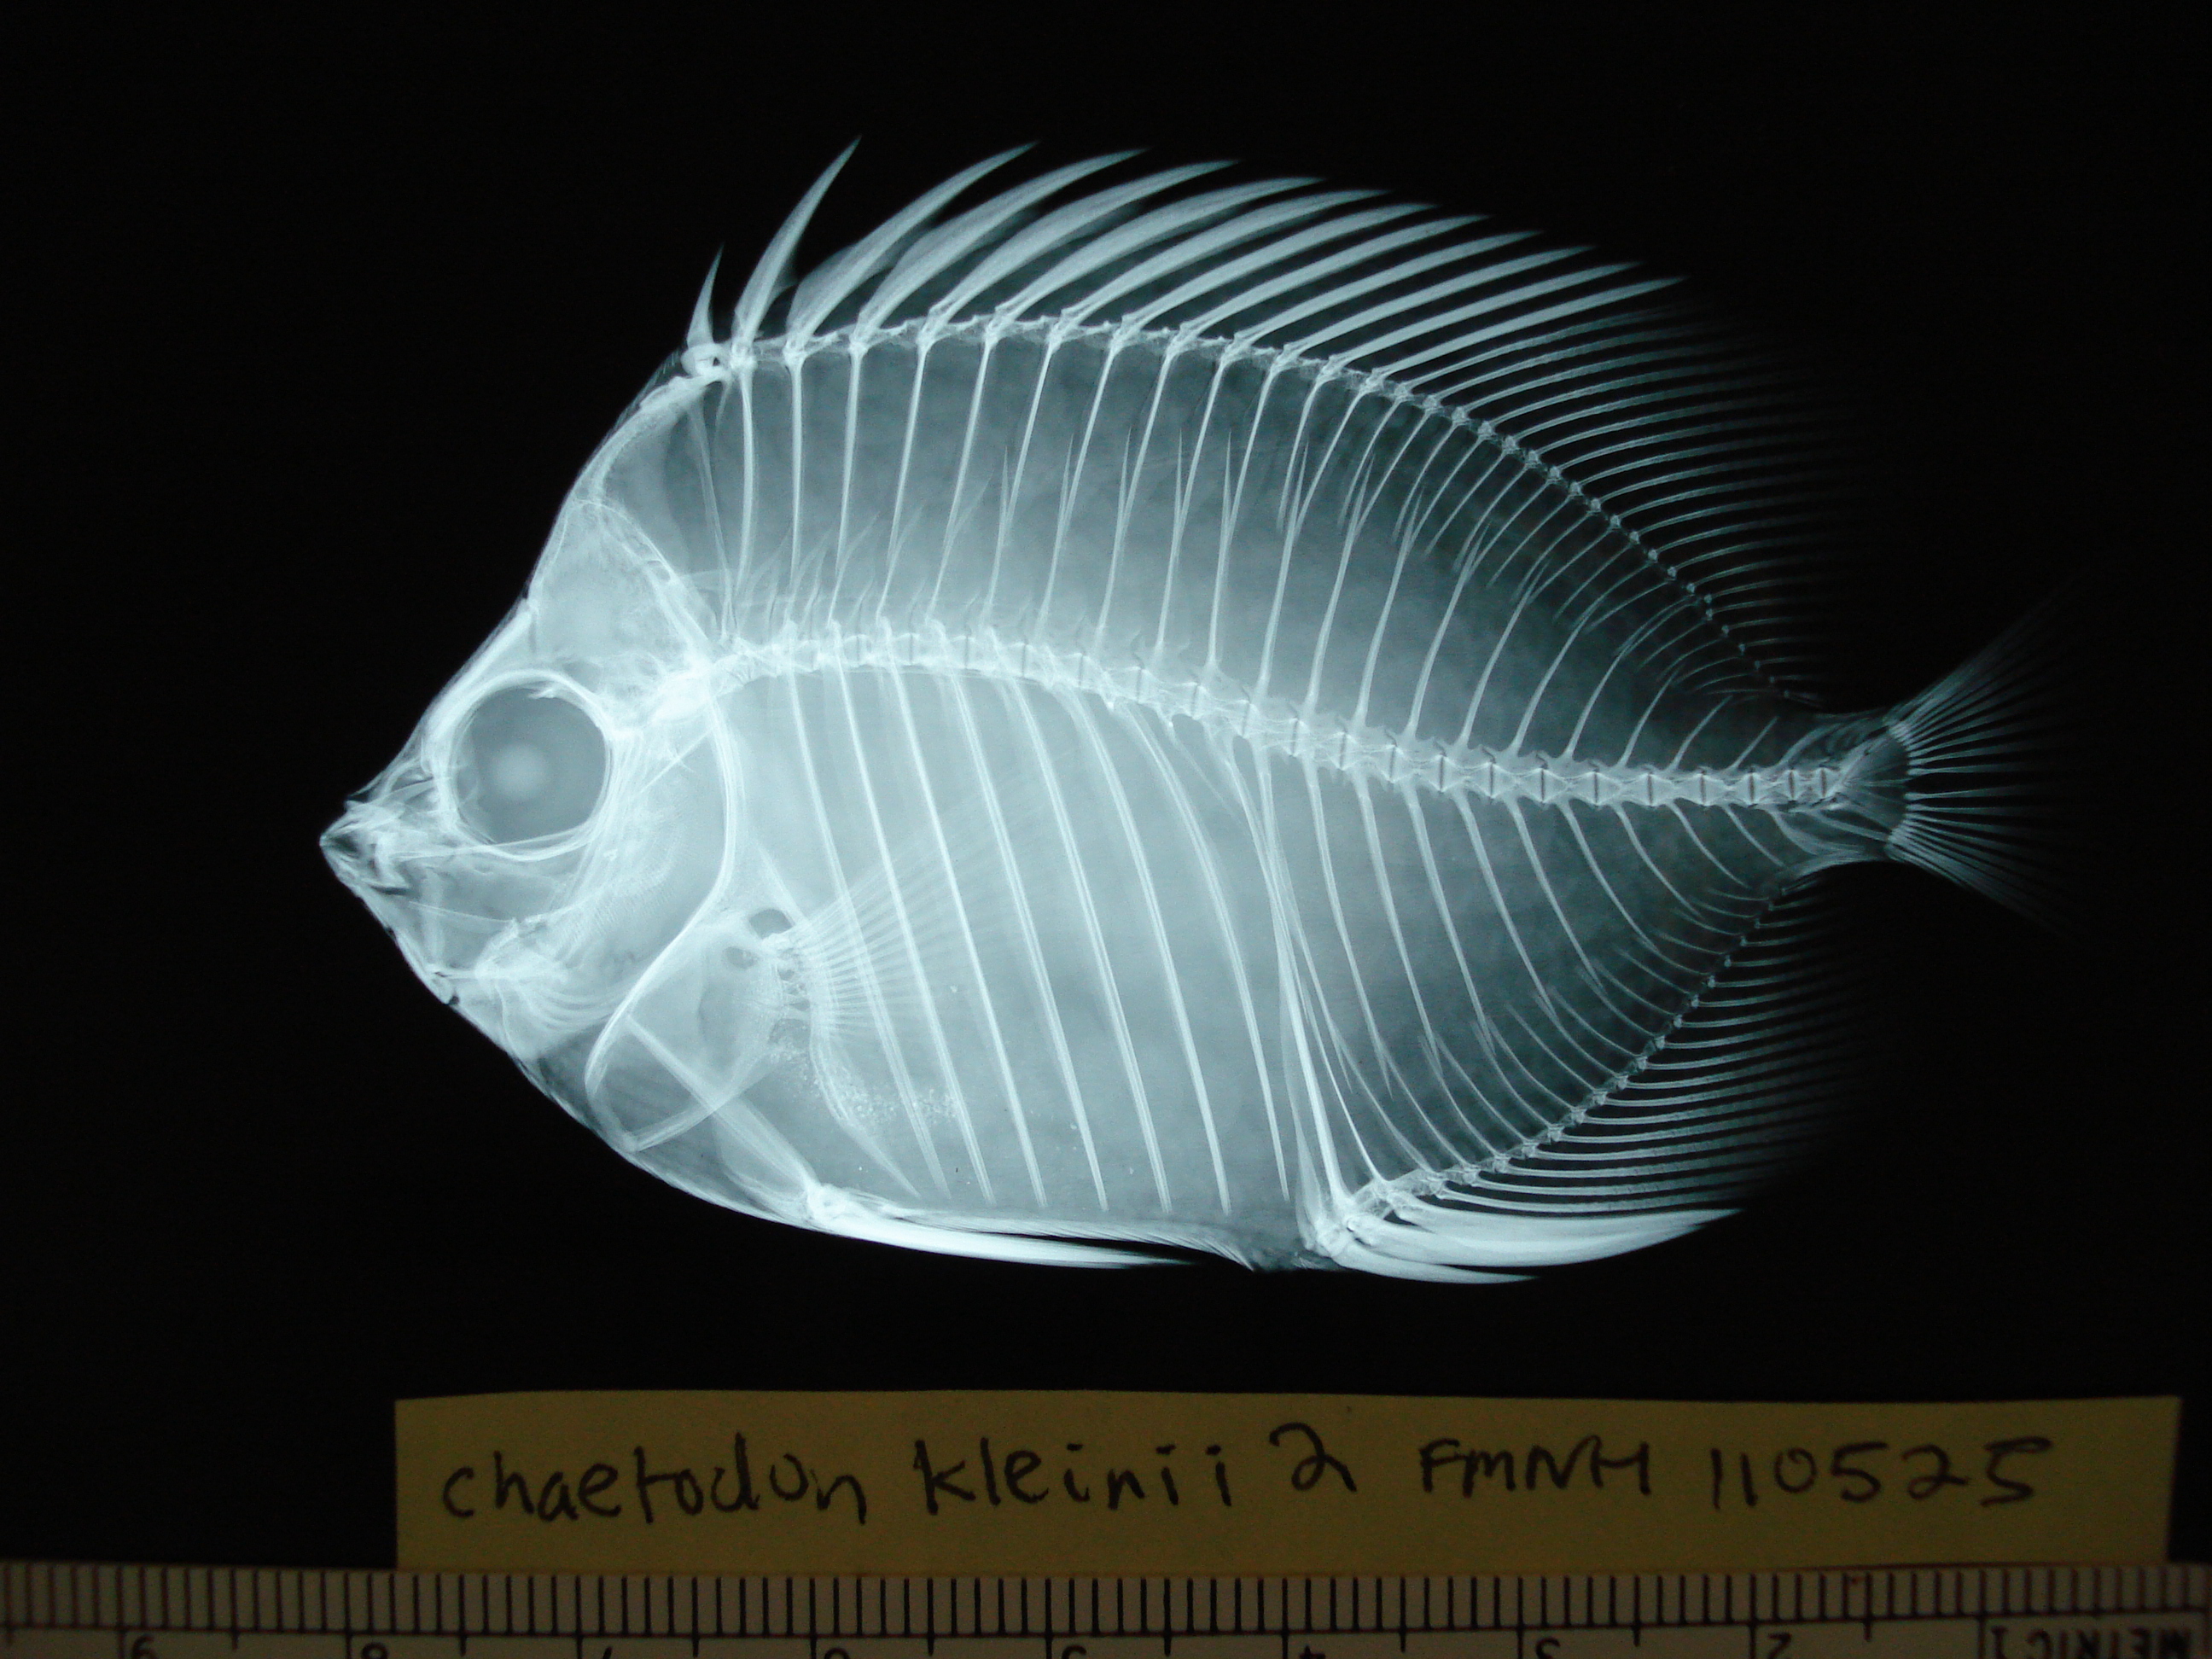 x-ray (c) Field Museum of Natural History - CC BY-NC 4.0